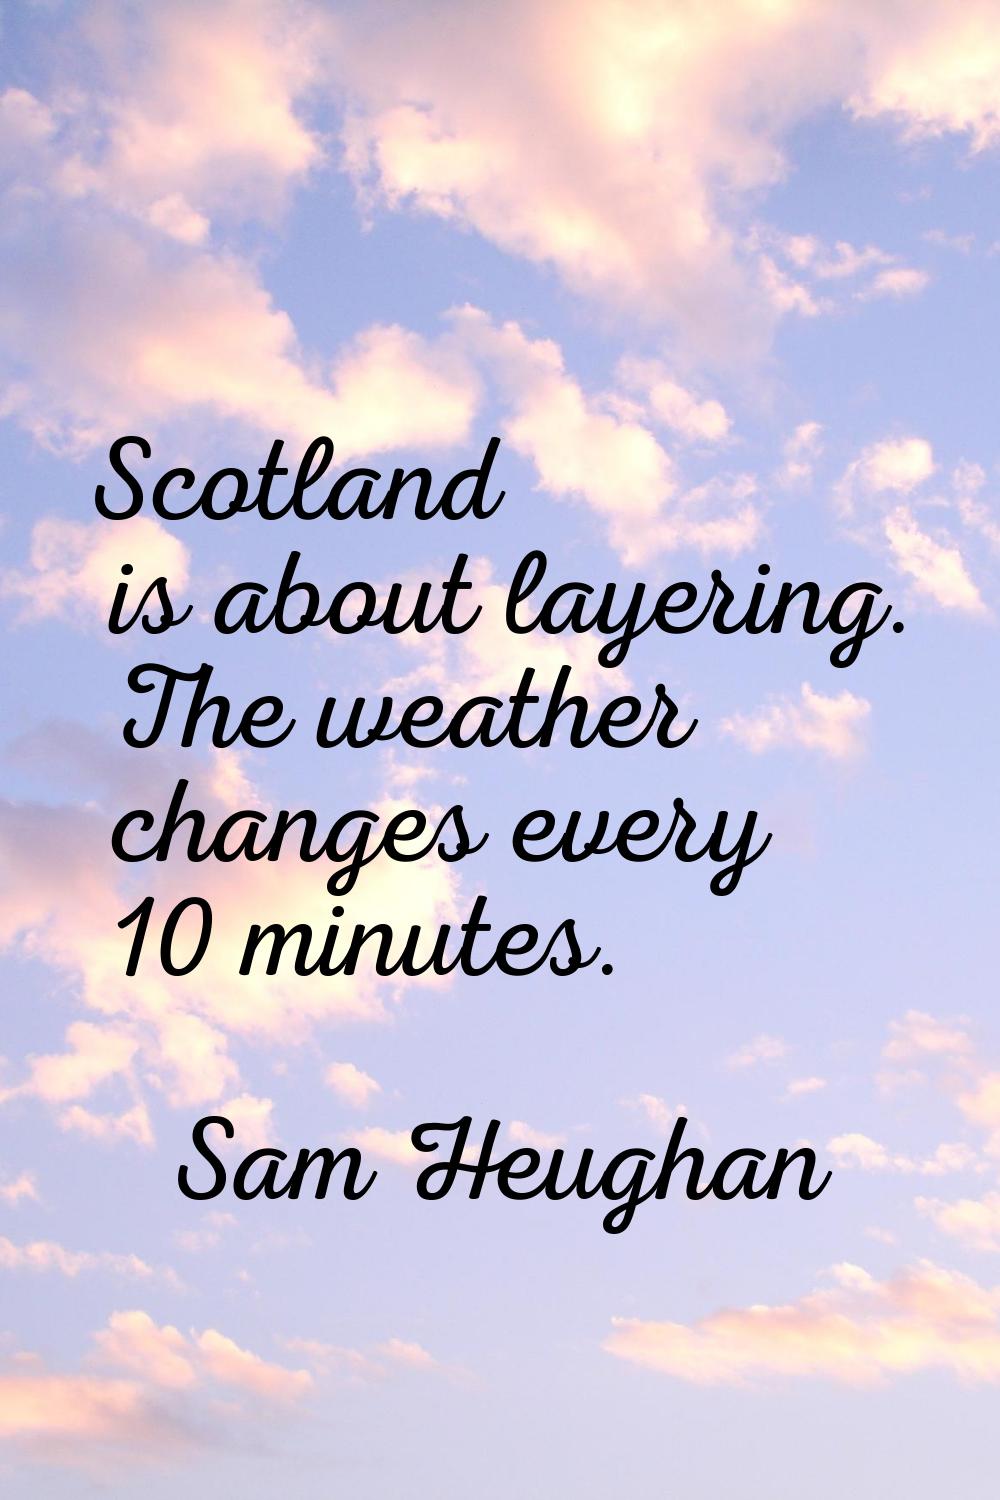 Scotland is about layering. The weather changes every 10 minutes.